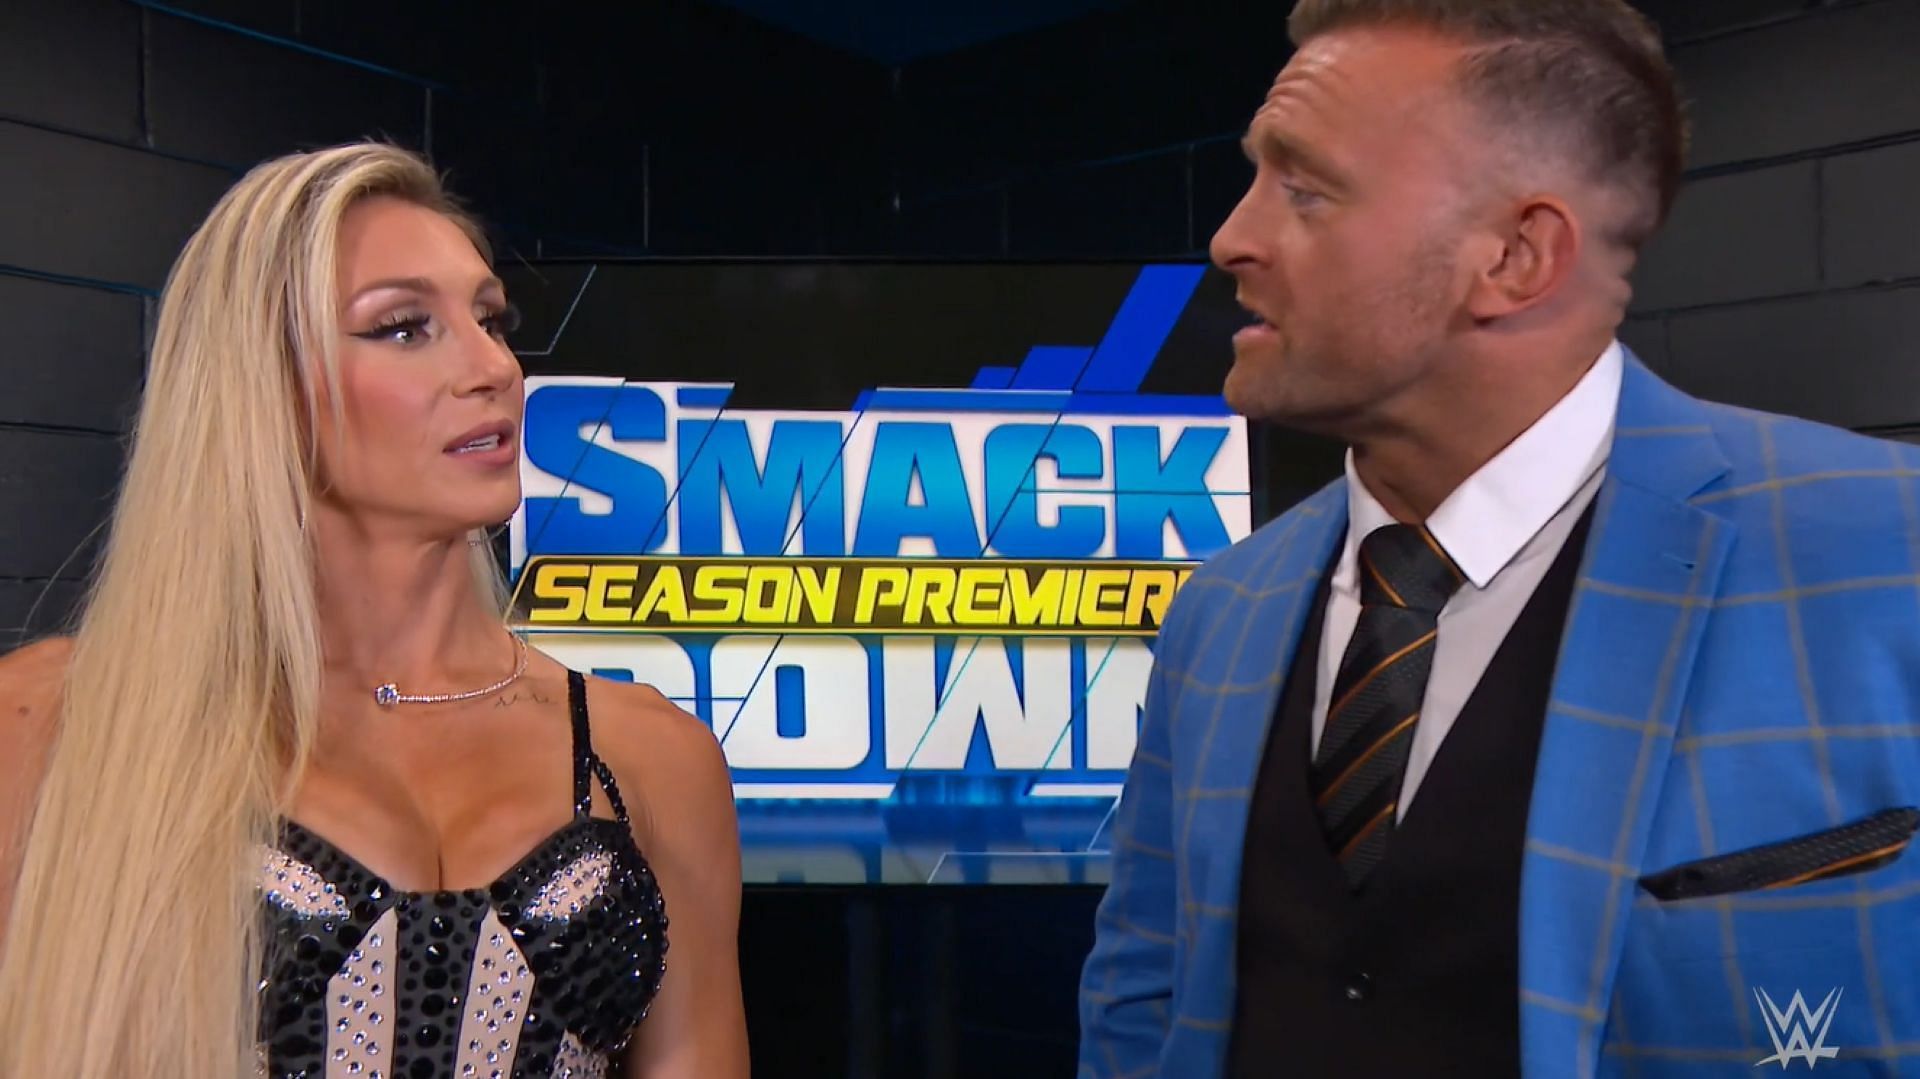 The Queen could have a backstage meeting with SmackDown GM Nick Aldis. [Image via WWE website]